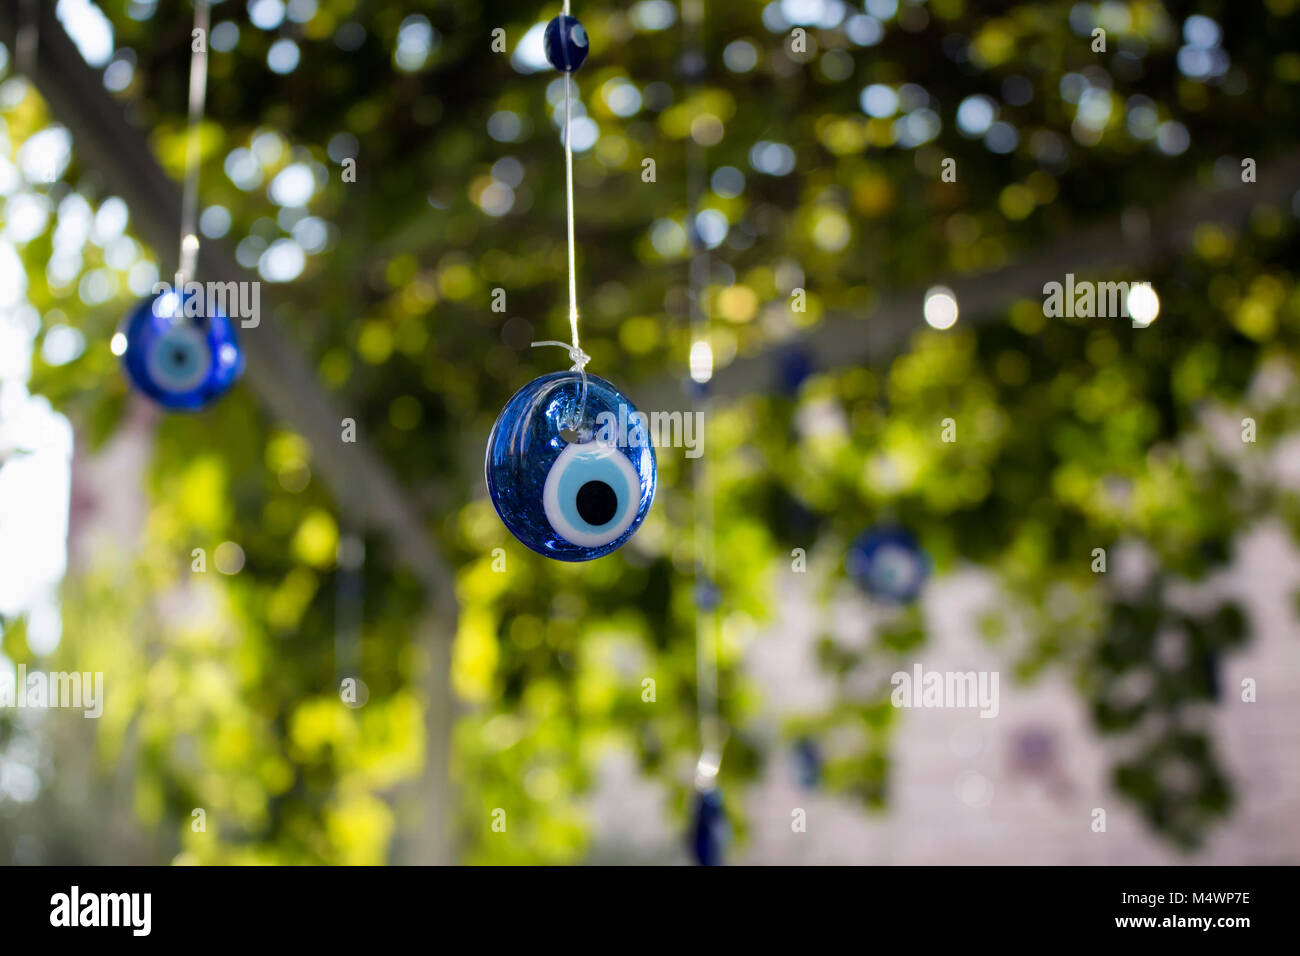 Evil eyes are hung in decorative purpose with a tree in the background in Cunda (Alibey) island. Stock Photo